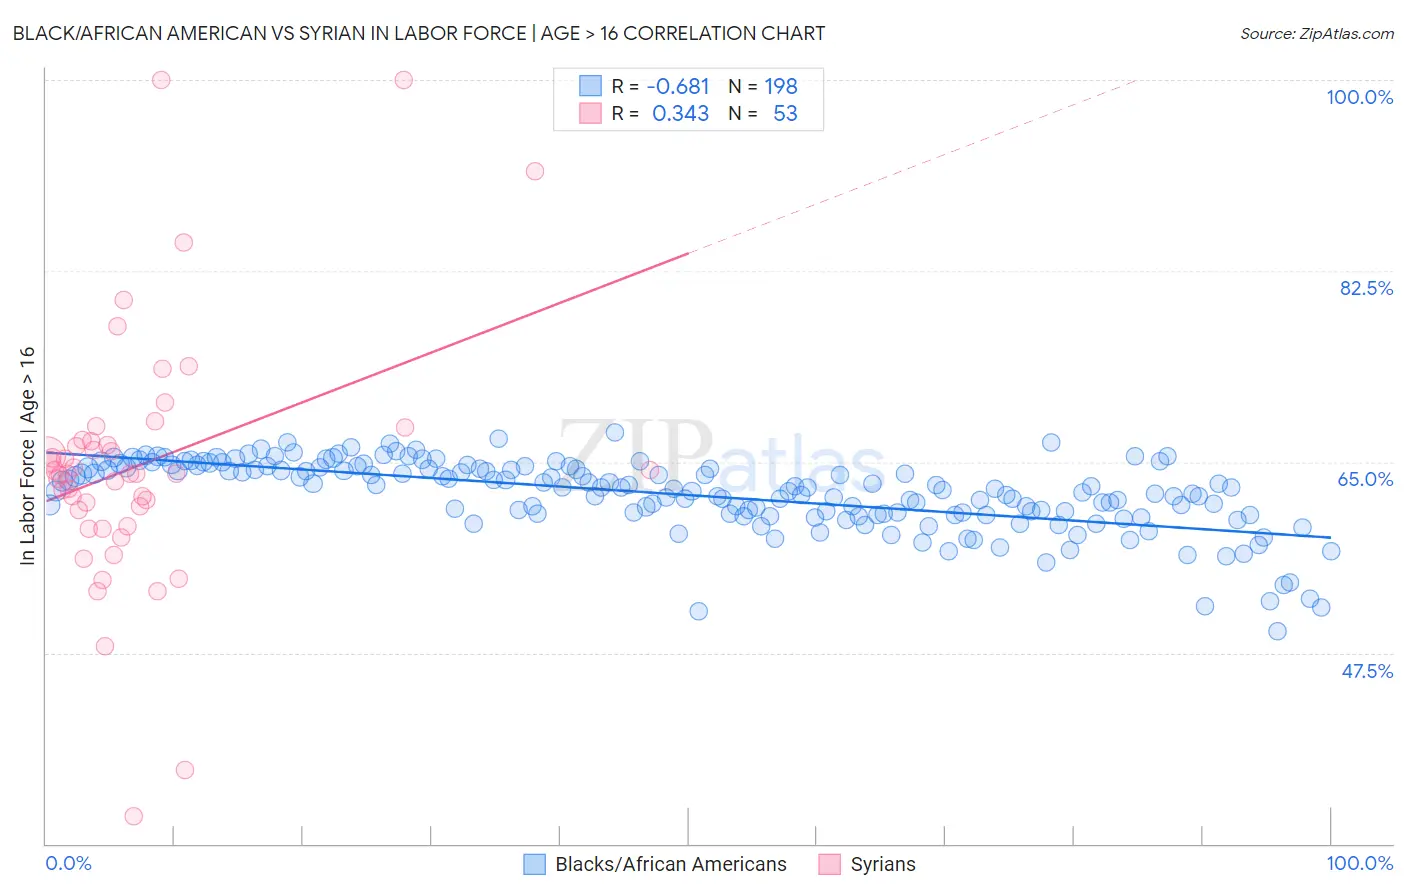 Black/African American vs Syrian In Labor Force | Age > 16